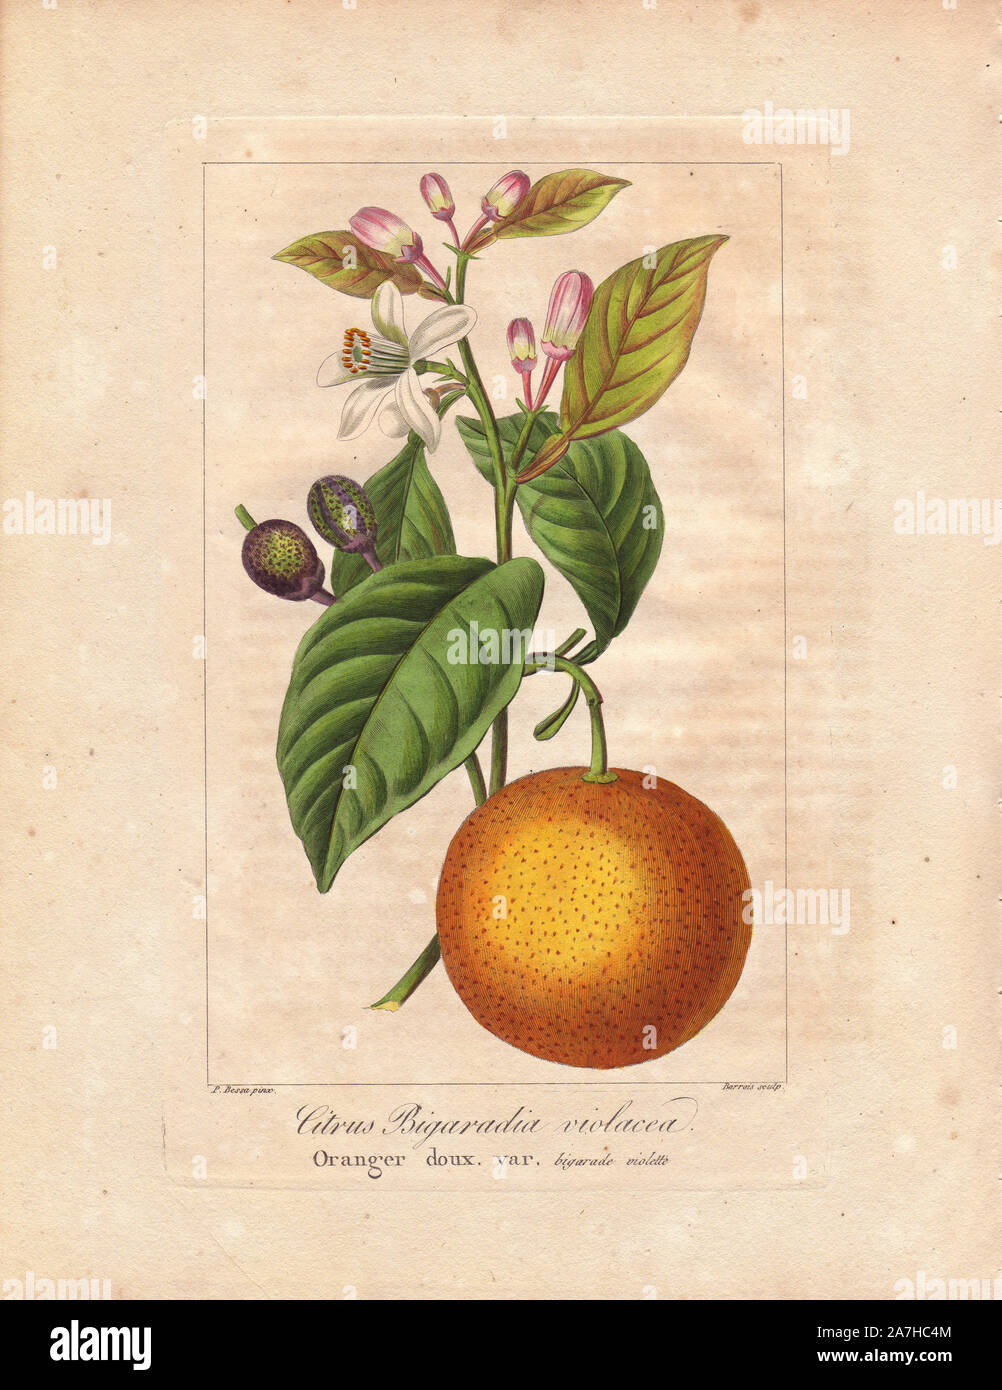 Bigarade bitter orange, Citrus x aurantium. Handcoloured stipple engraving on copper by Barrois from a botanical illustration by Pancrace Bessa from Mordant de Launay's 'Herbier General de l'Amateur,' Audot, Paris, 1820. The Herbier was published from 1810 to 1827 and edited by Mordant de Launay and Loiseleur-Deslongchamps. Bessa (1772-1830s), along with Redoute and Turpin, is considered one of the greatest French botanical artists of the 19th century. Stock Photo